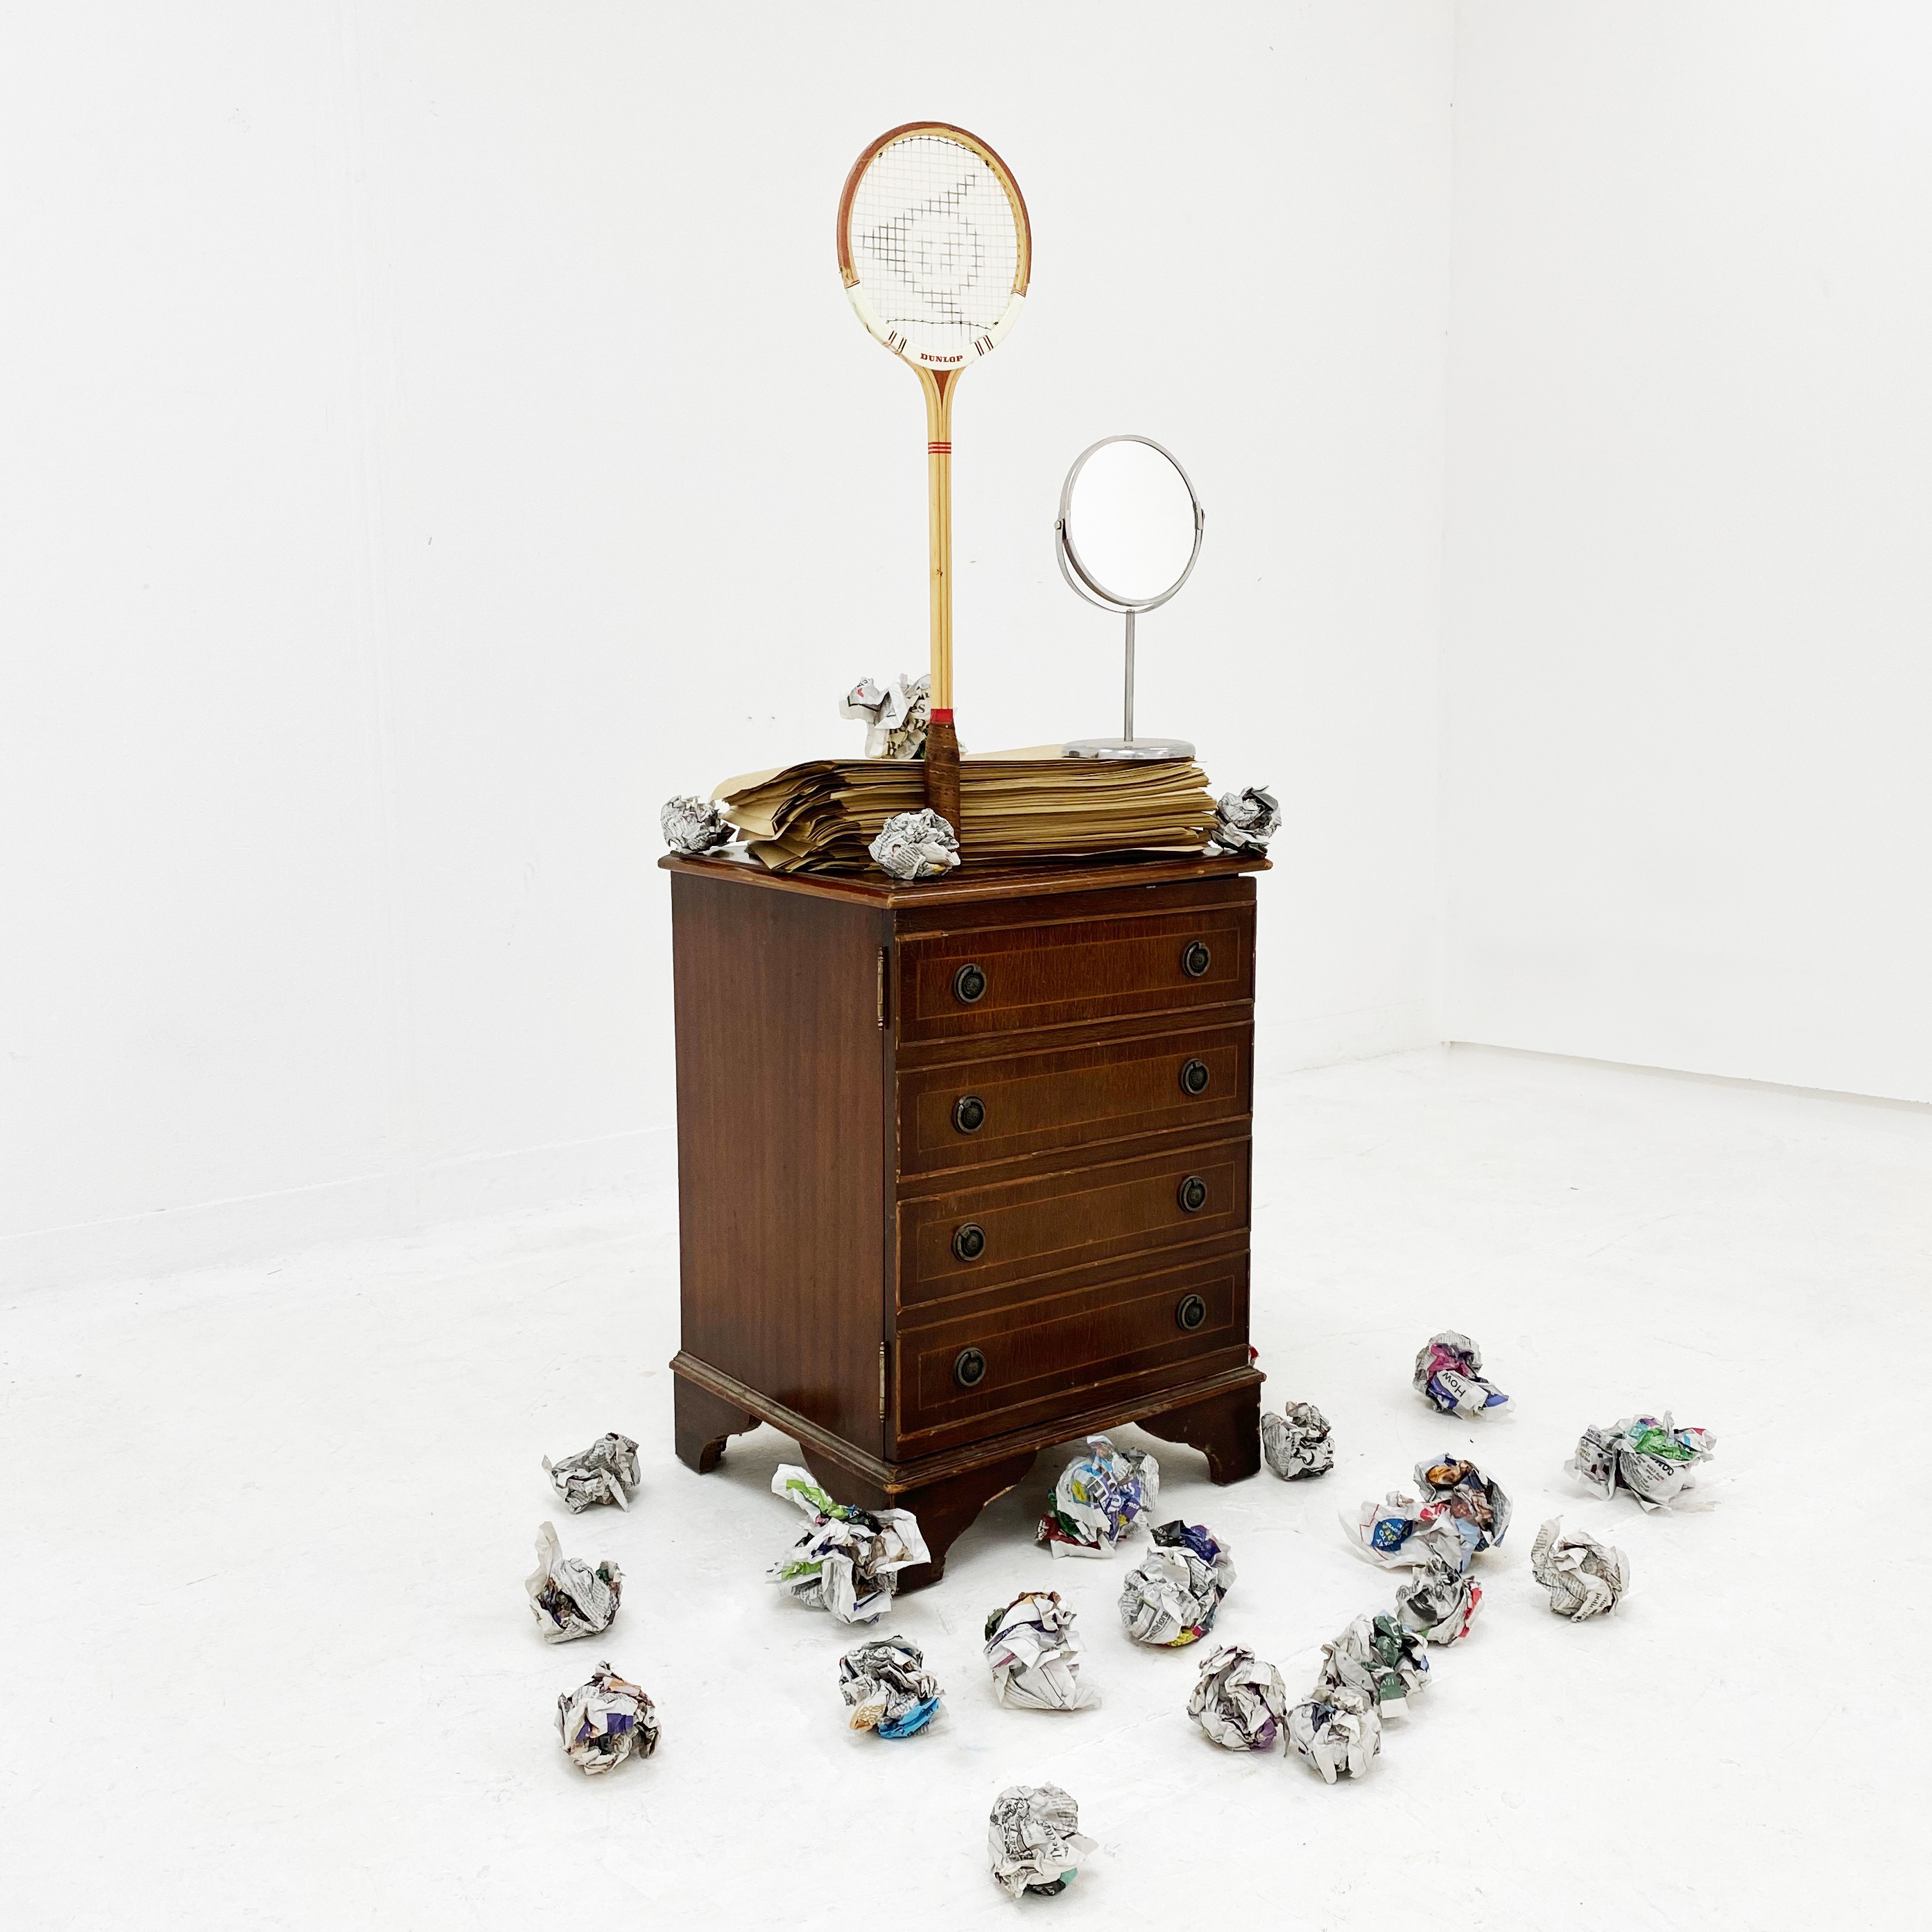 'Narcissus is back' installation. 2020 Found objects. 